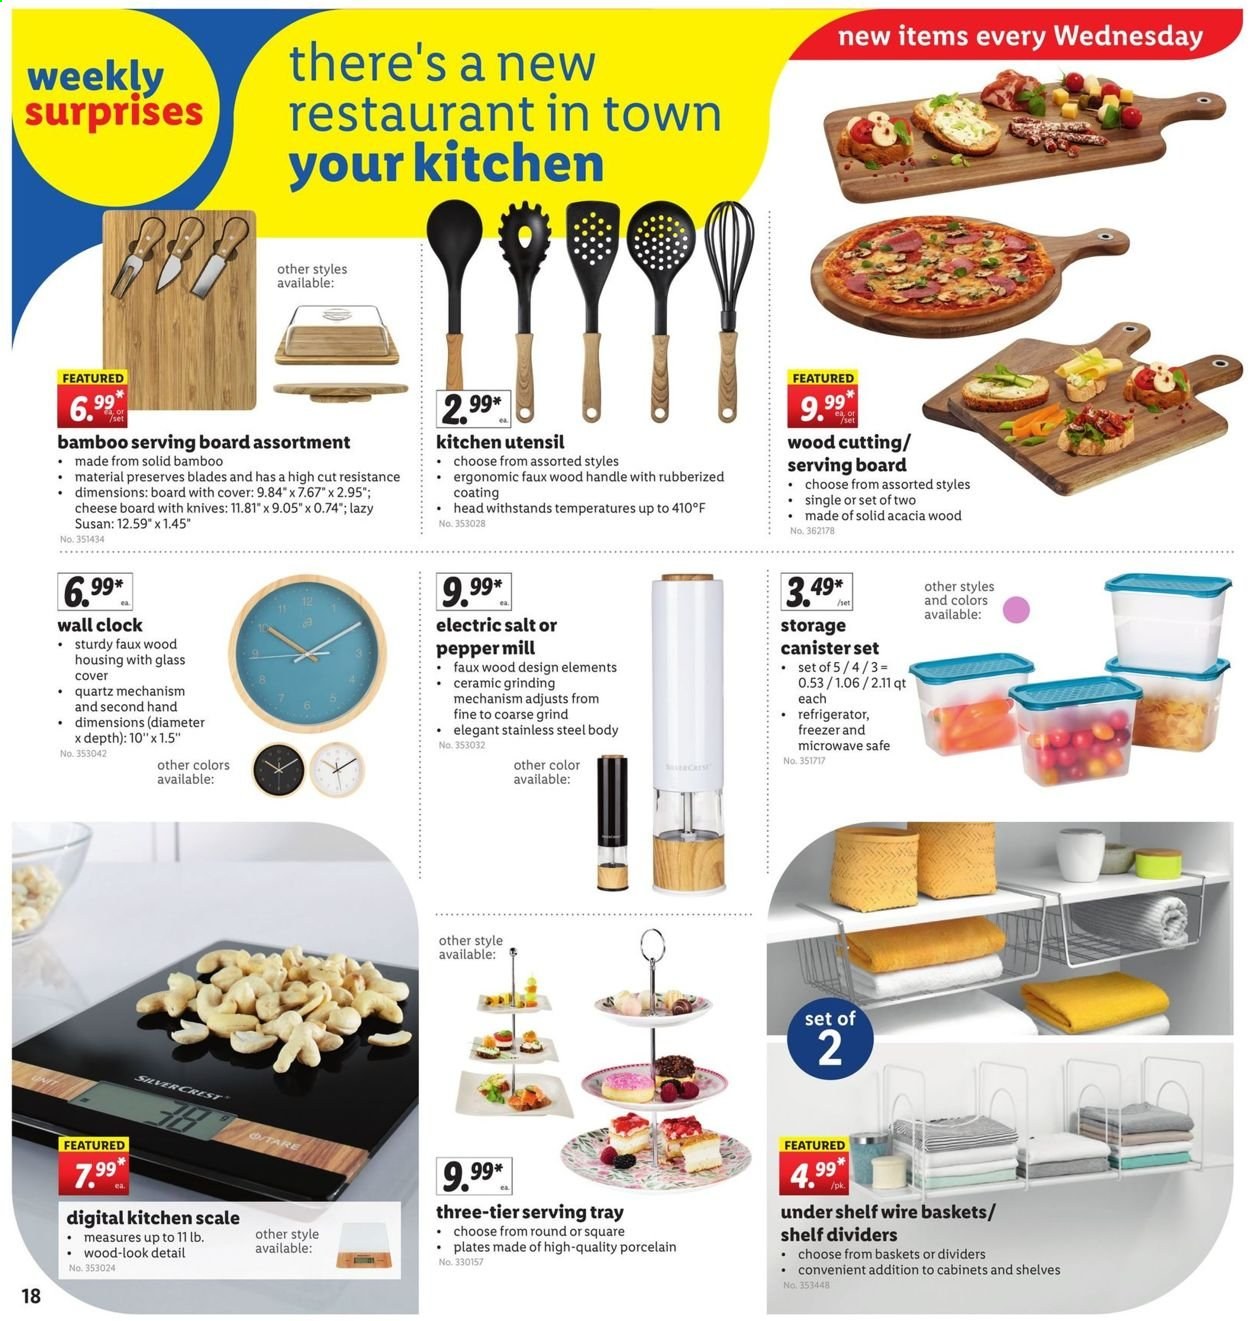 thumbnail - Lidl Flyer - 06/09/2021 - 06/15/2021 - Sales products - scale, cheese, salt, pepper, Crest, basket, clock, canister, knife, tray, plate, kitchen scale, shelves, car battery. Page 18.